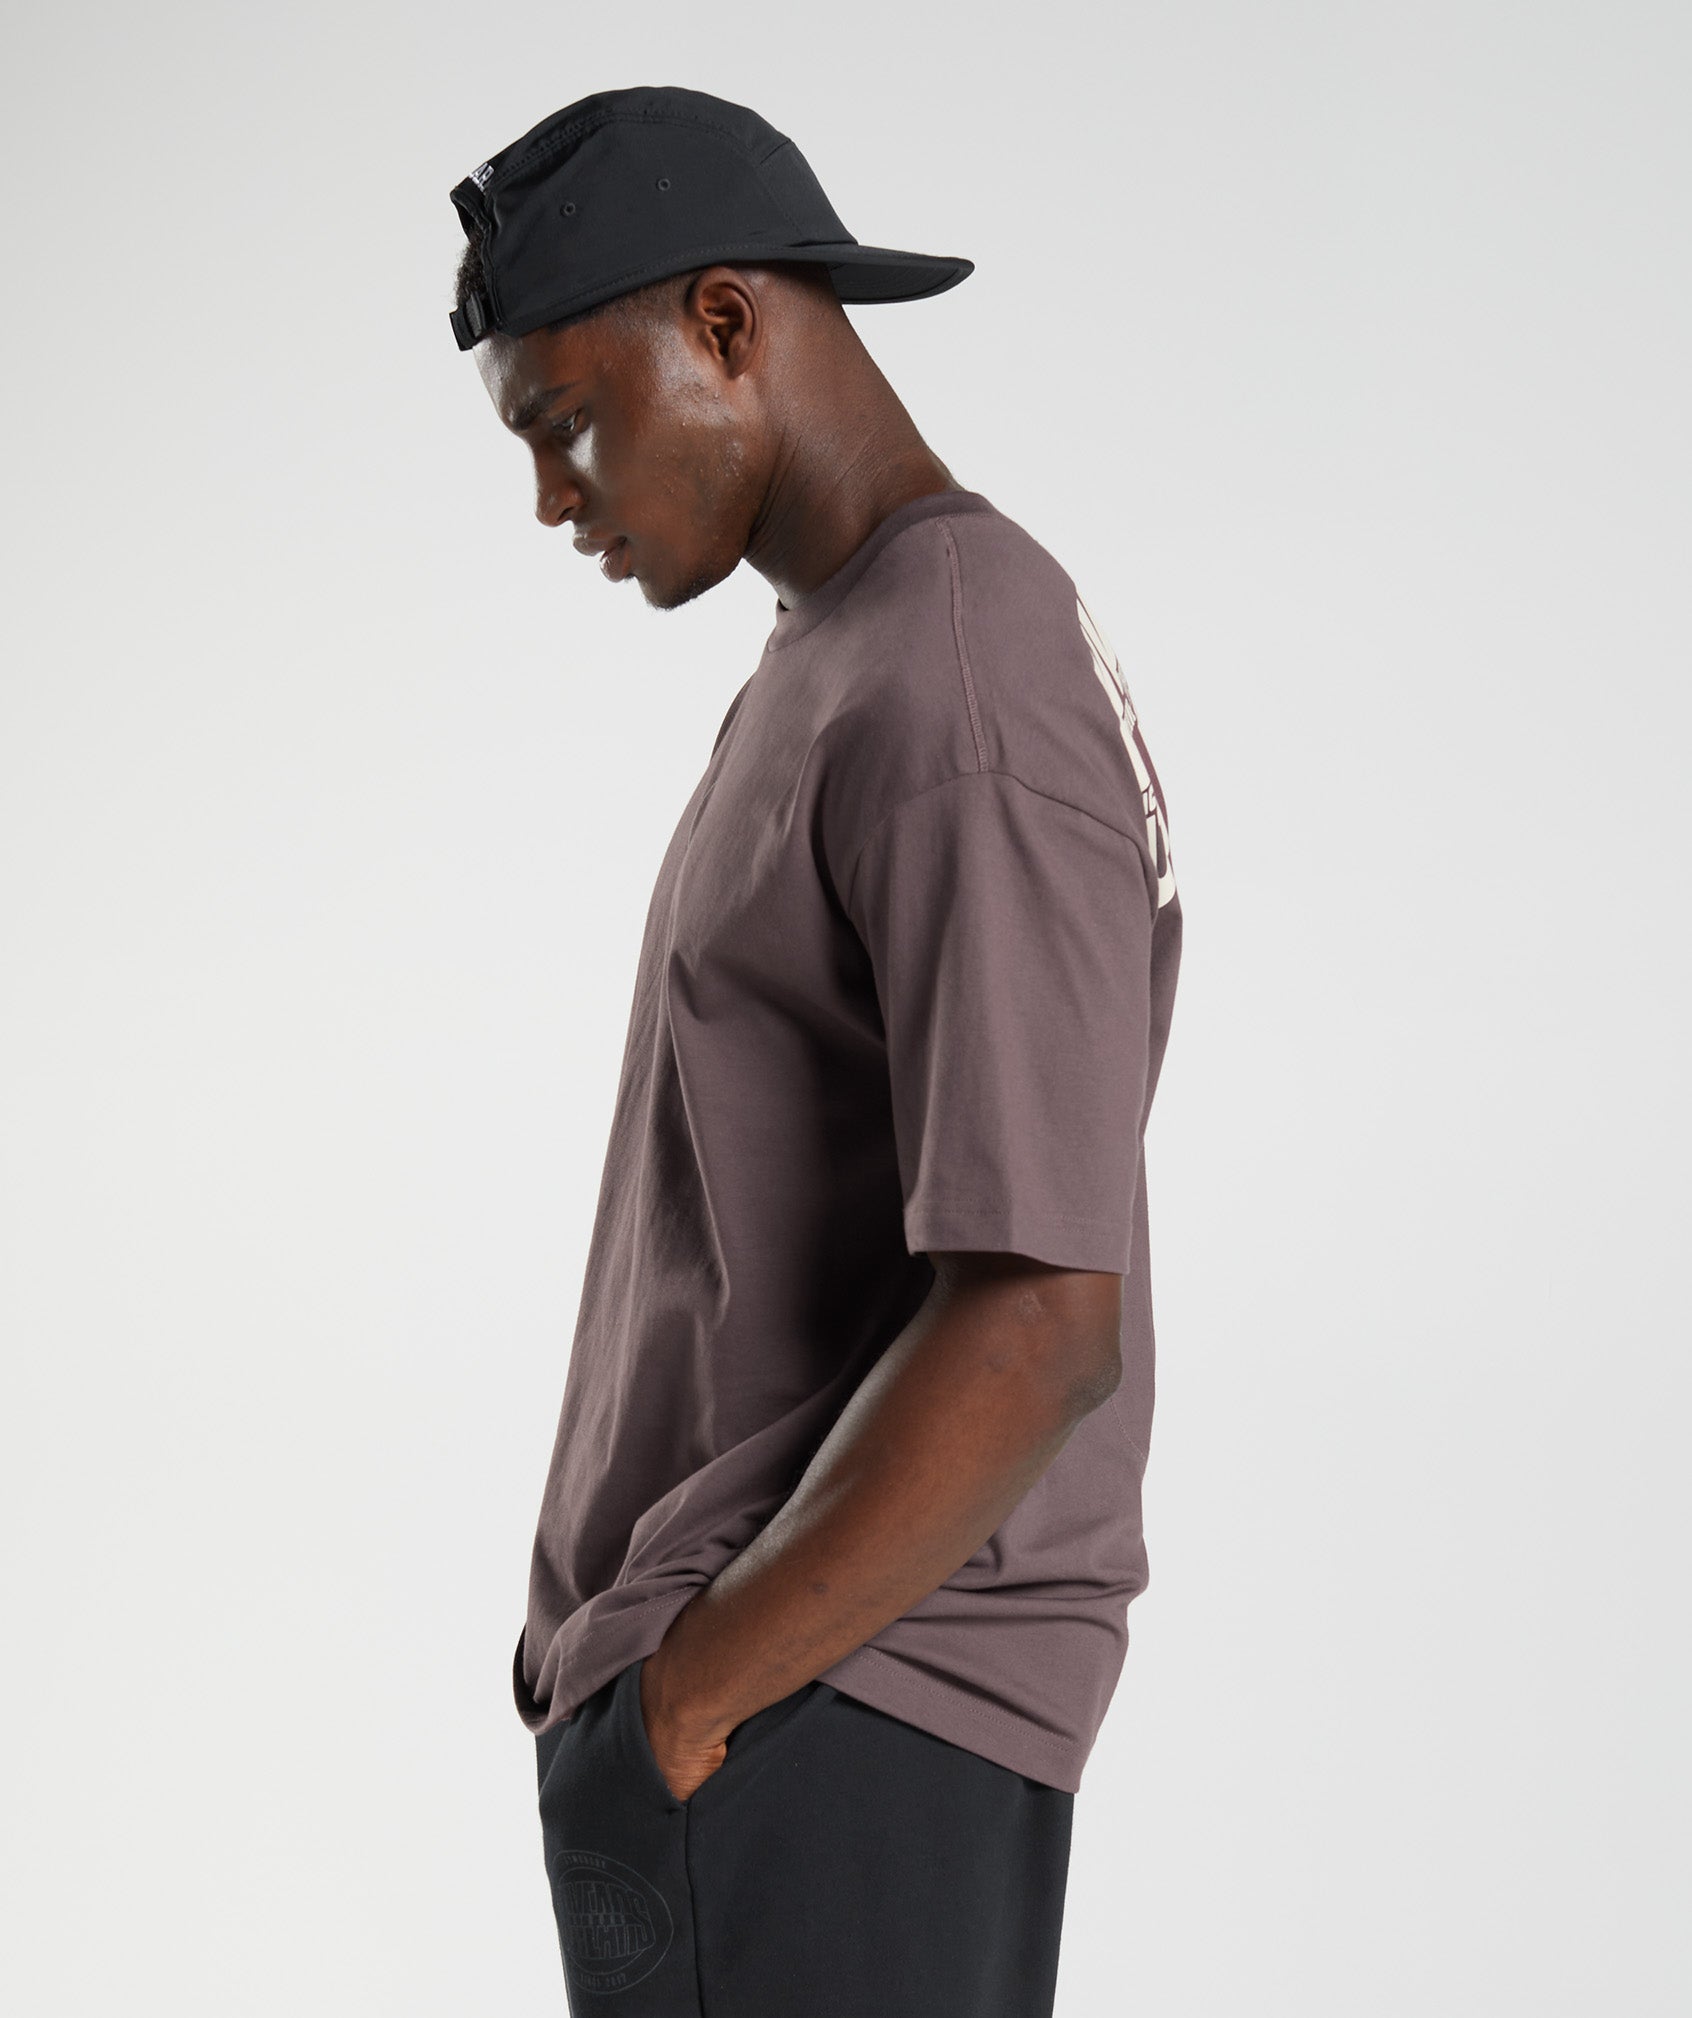 GS10 Year Oversized T-Shirt in Chocolate Brown - view 3